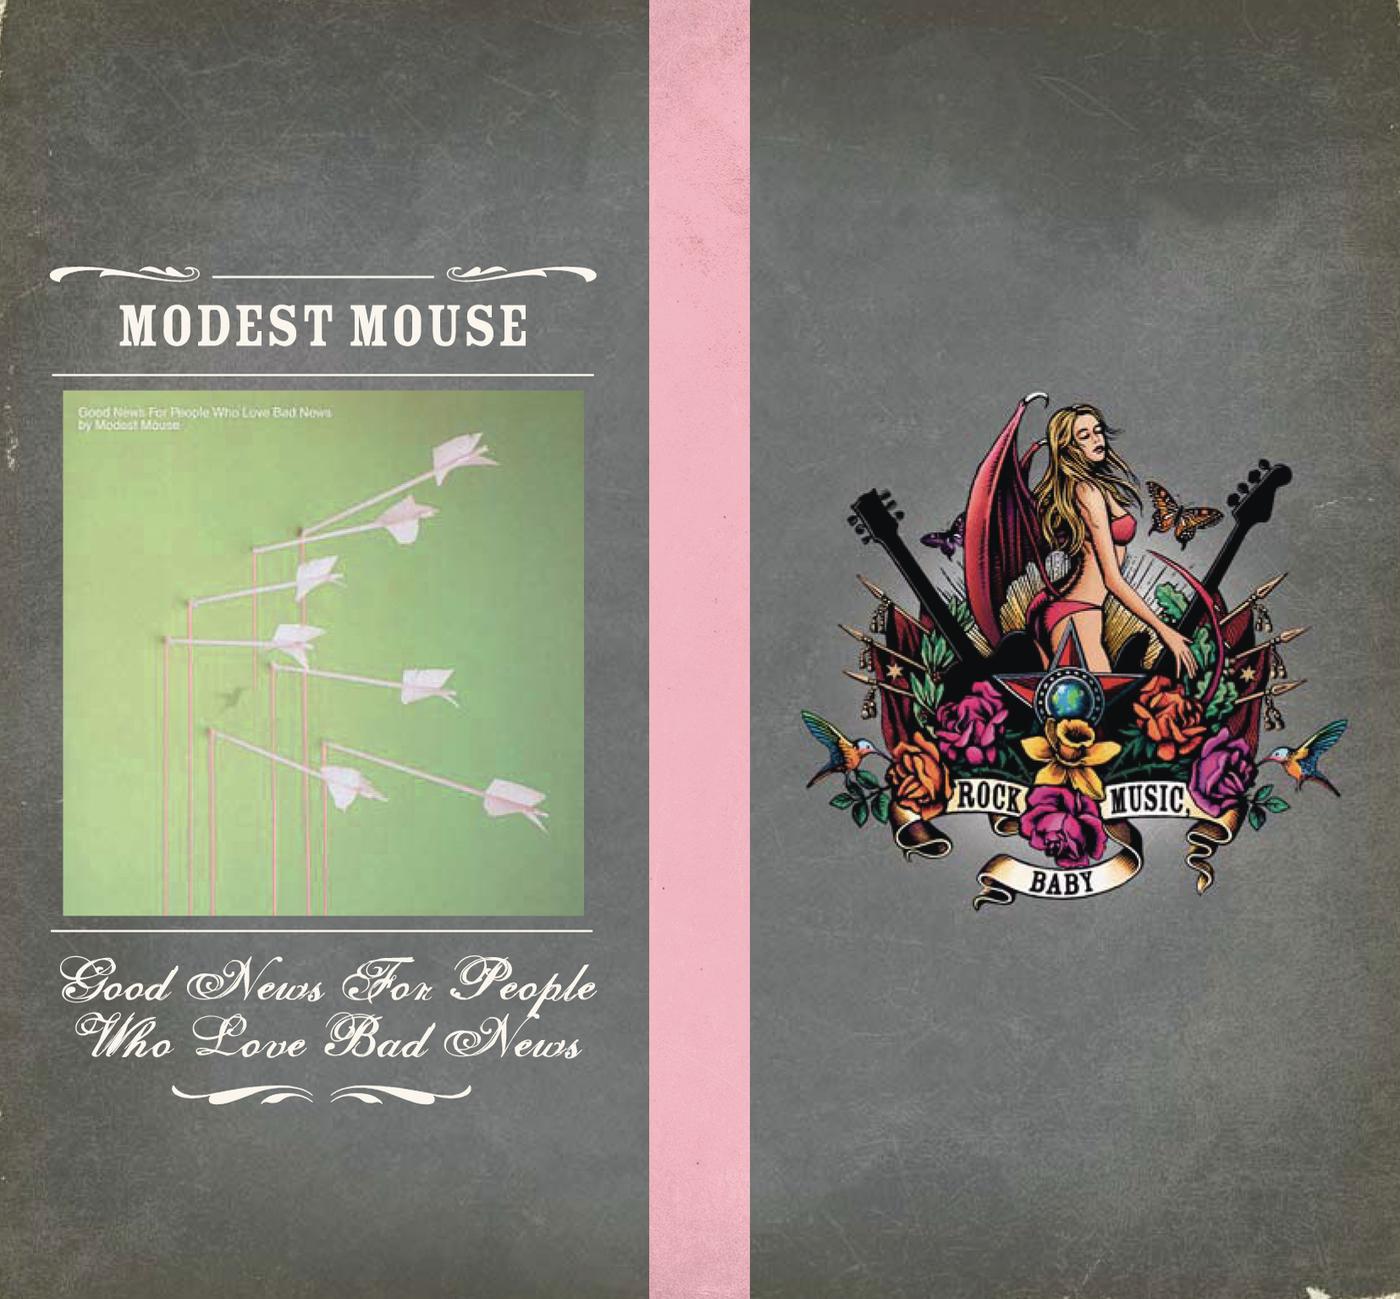 Float On歌词 歌手Modest Mouse-专辑Good News For People Who Love Bad News-单曲《Float On》LRC歌词下载